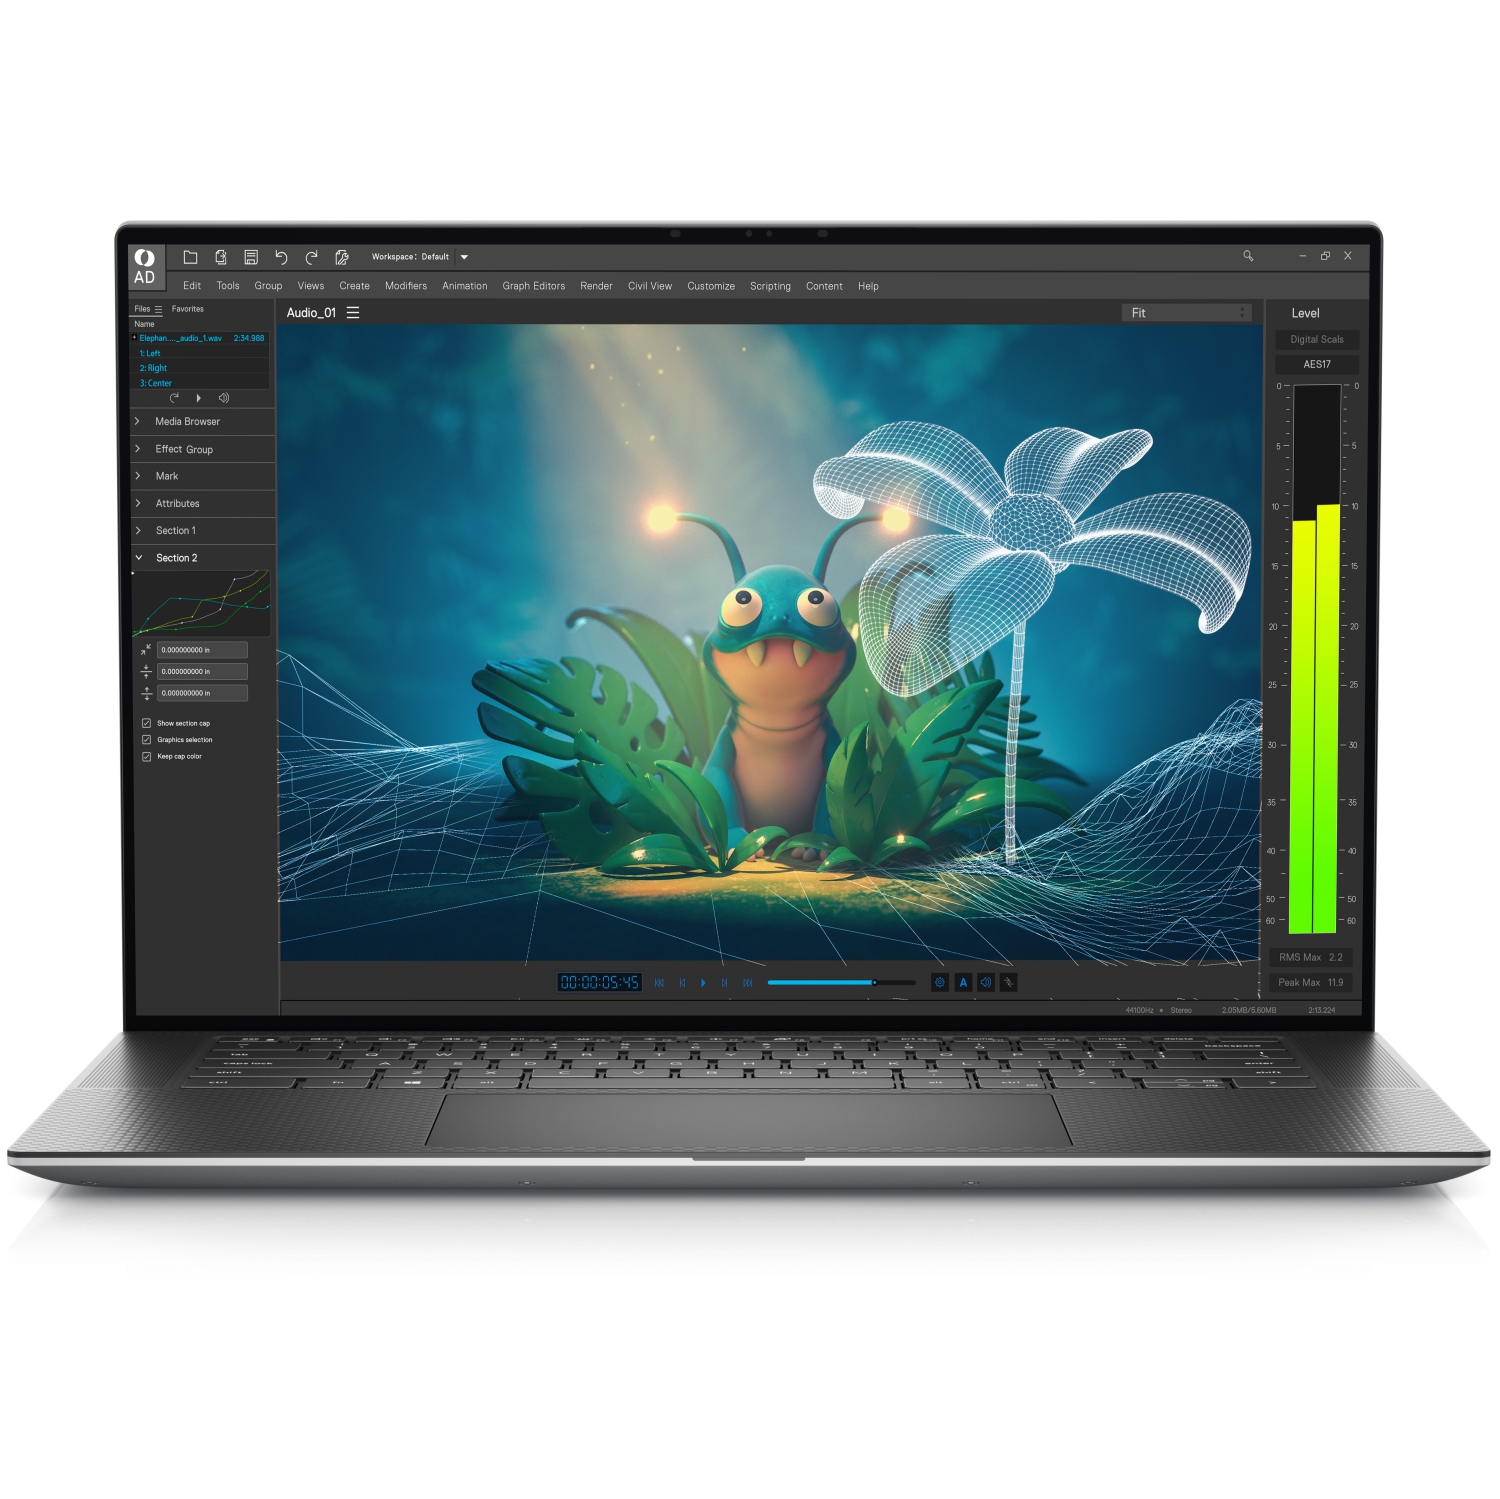 Refurbished (Excellent) – Dell Precision 5000 5570 Workstation Laptop (2022) | 15.6" 4K Touch | Core i7 - 1TB SSD - 64GB RAM - RTX A2000 | 14 Cores @ 4.7 GHz - 12th Gen CPU